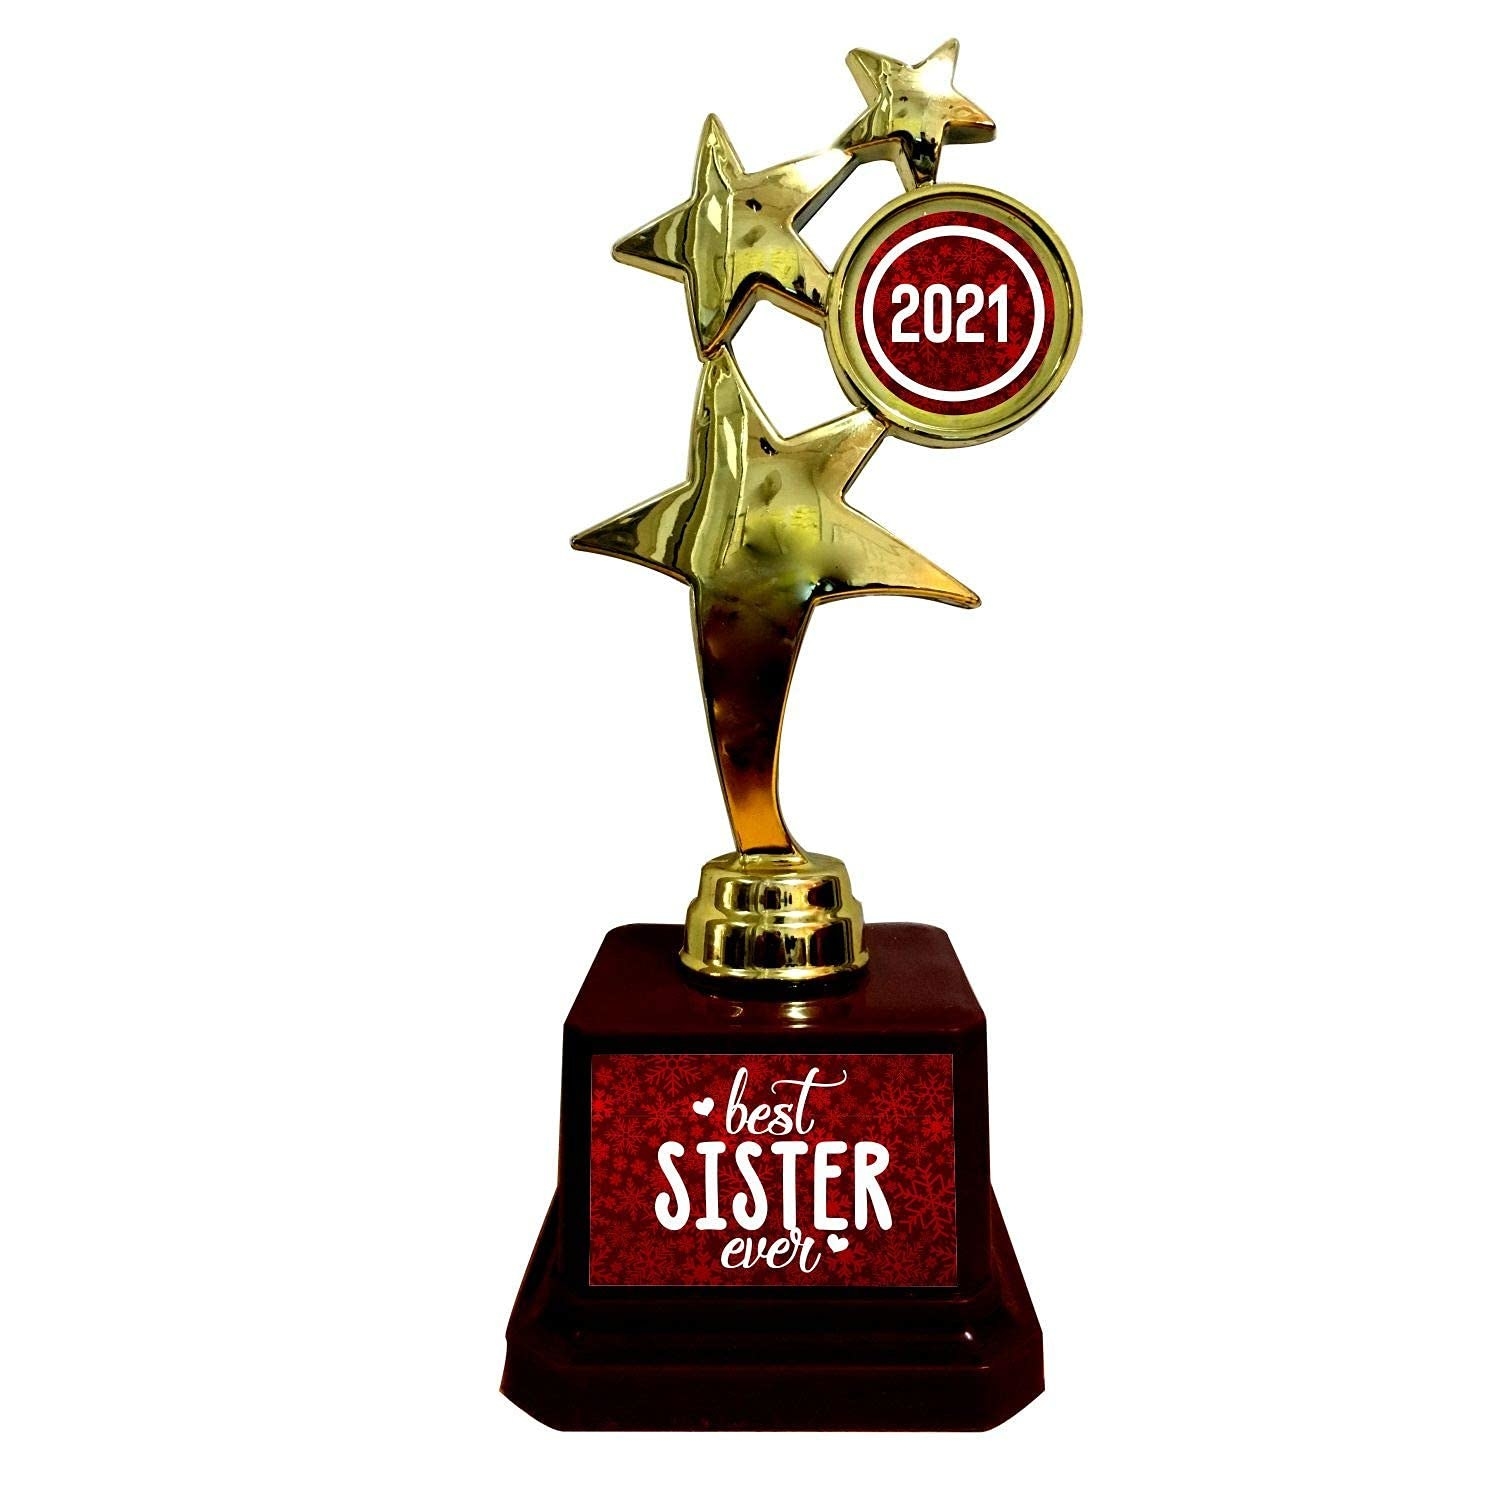 A star-shaped golden trophy with the words &#x27;Best Sister Ever&#x27; written in white on a red background below